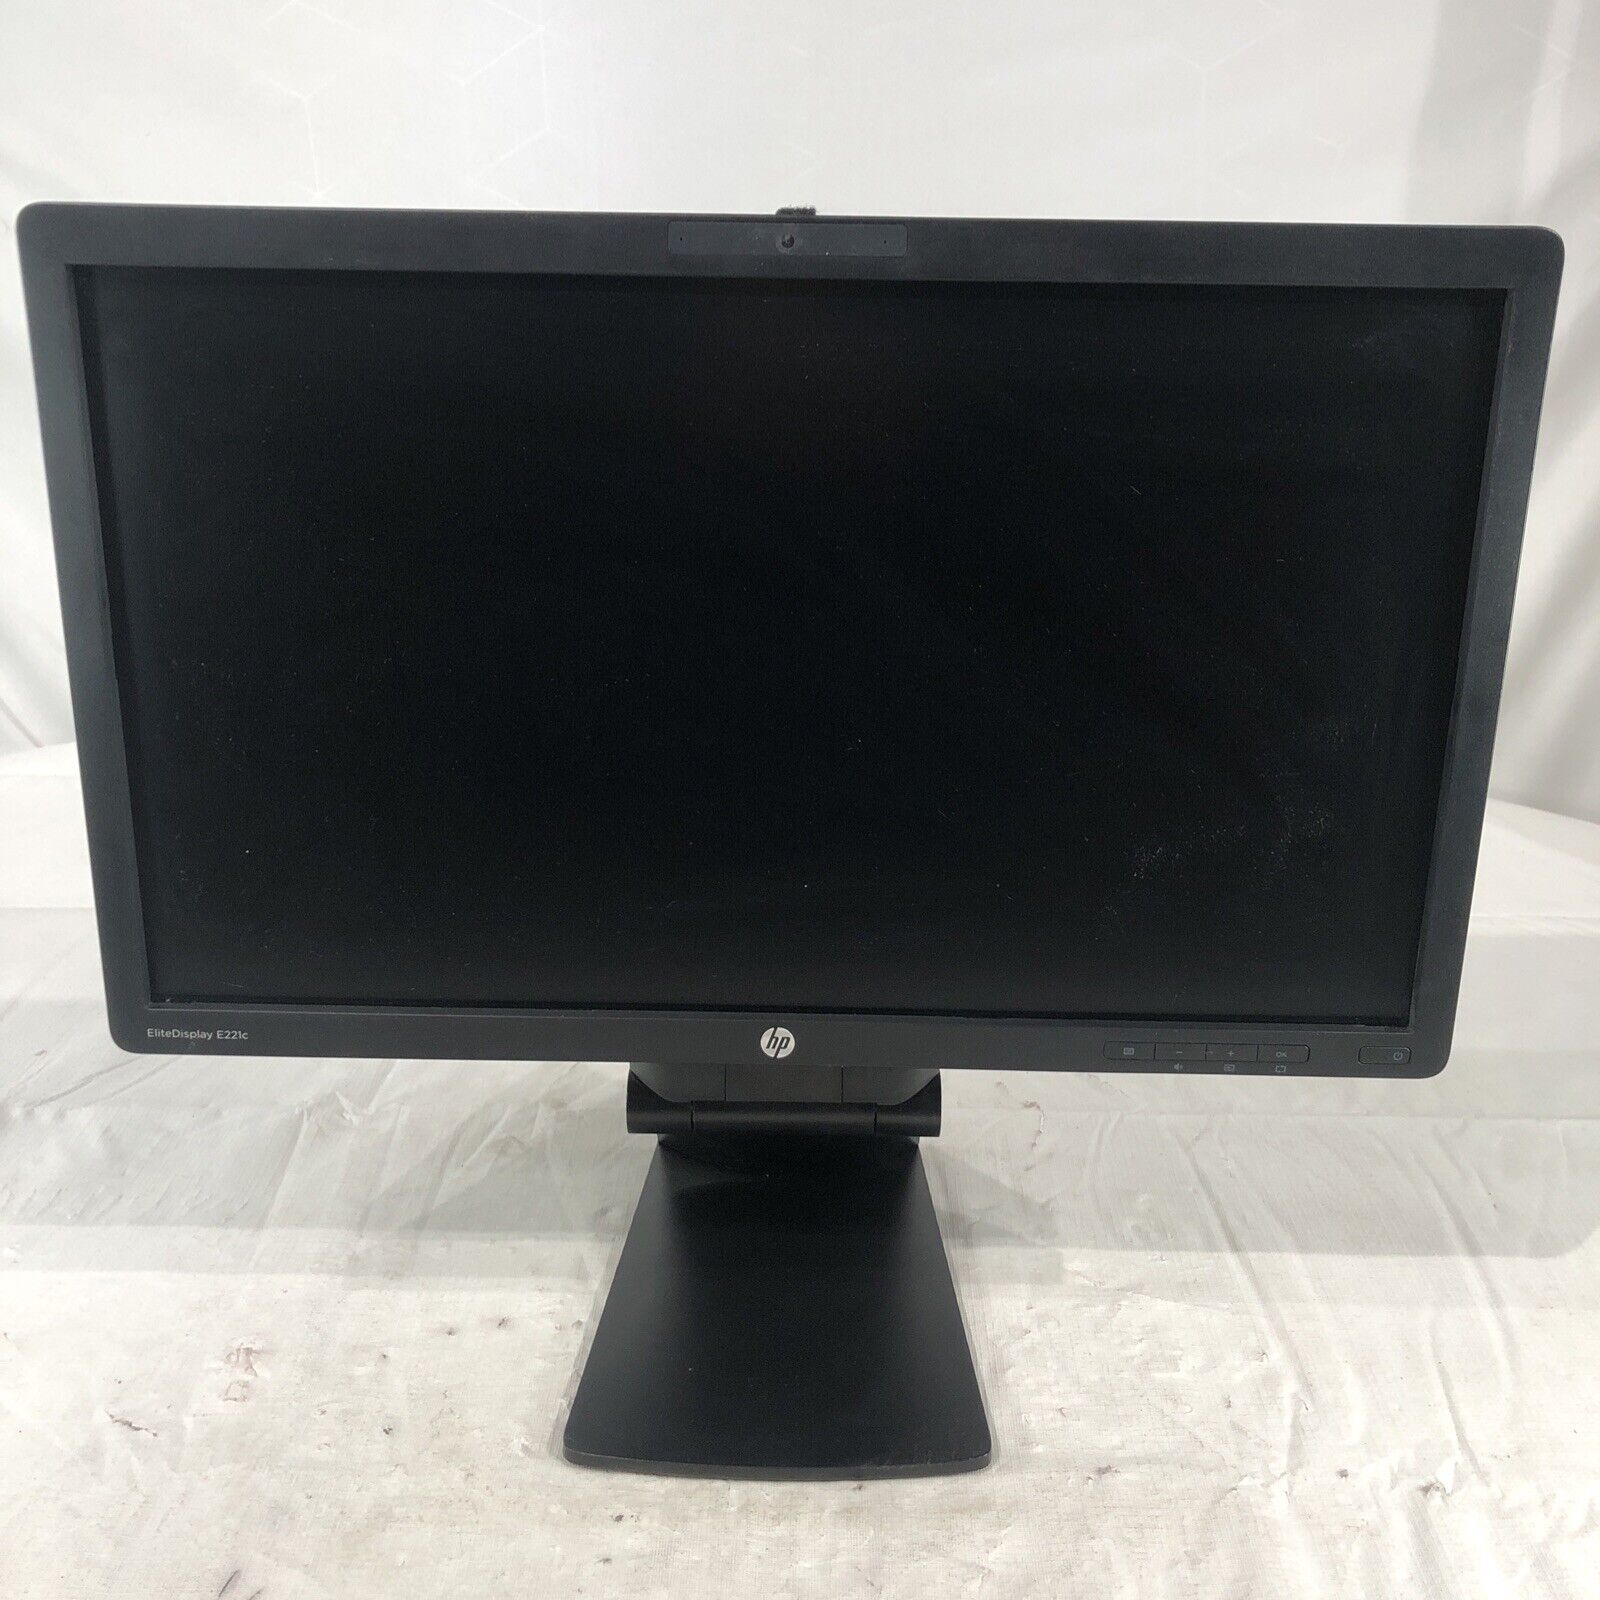 HP Elite Display E221 21.5in with Adjustable Stand Flat Screen Monitor 1920x1080